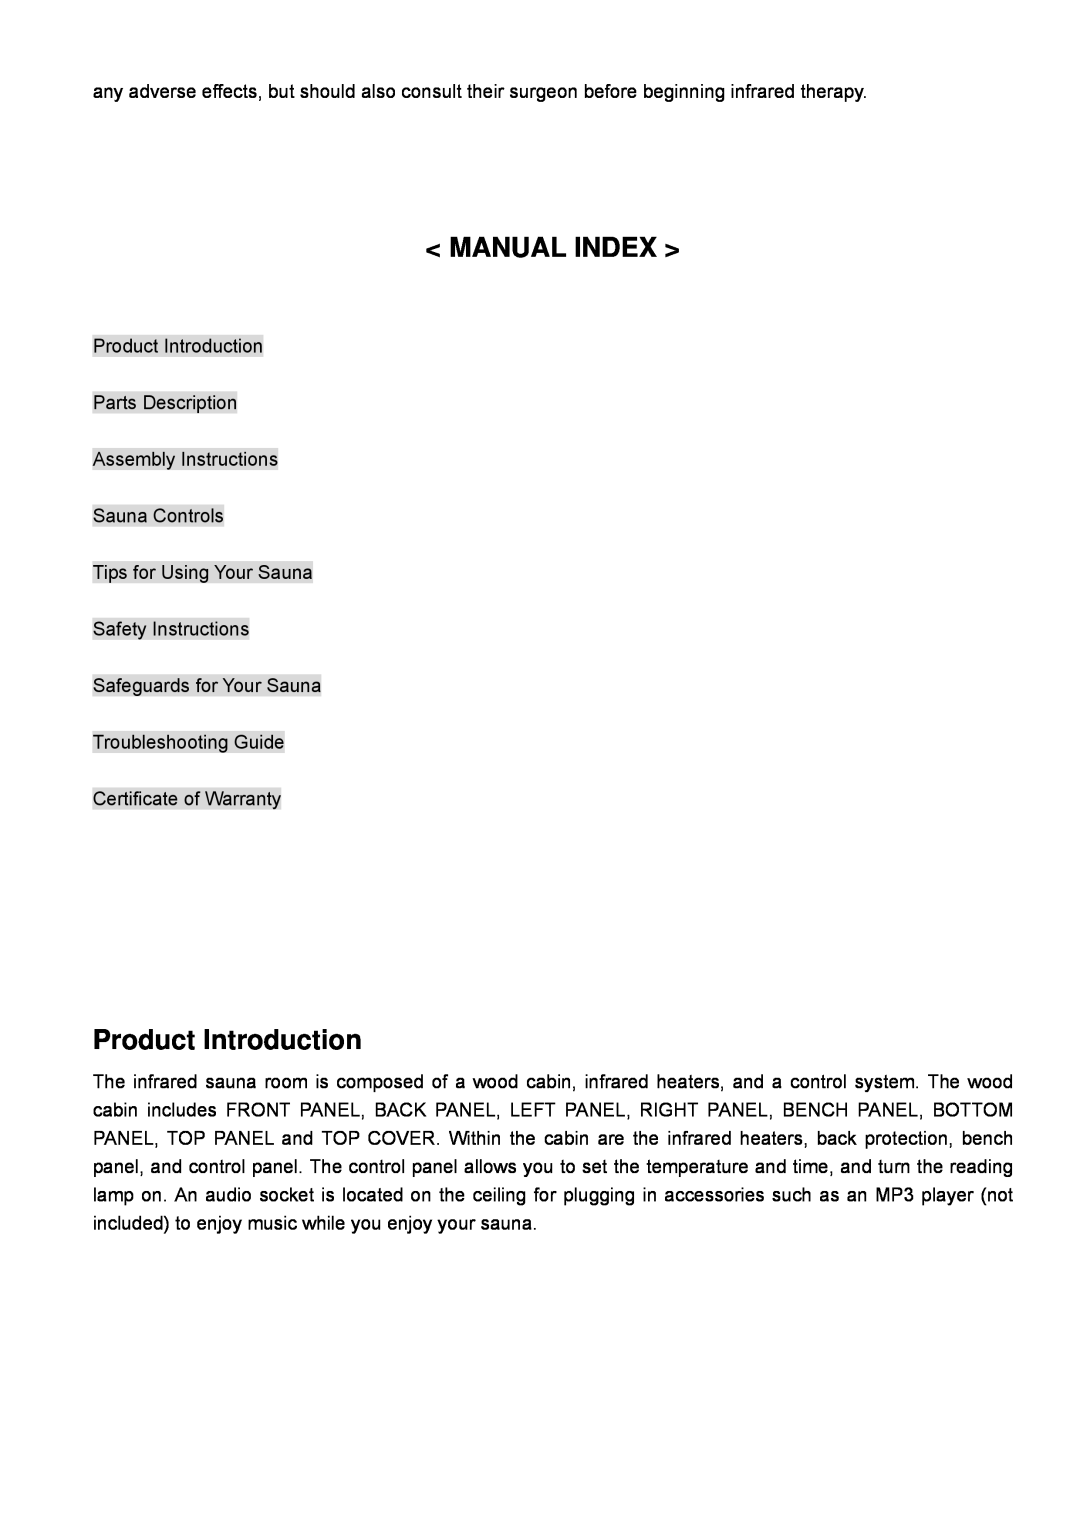 Keys Fitness BS-9101 owner manual Manual Index, Product Introduction 